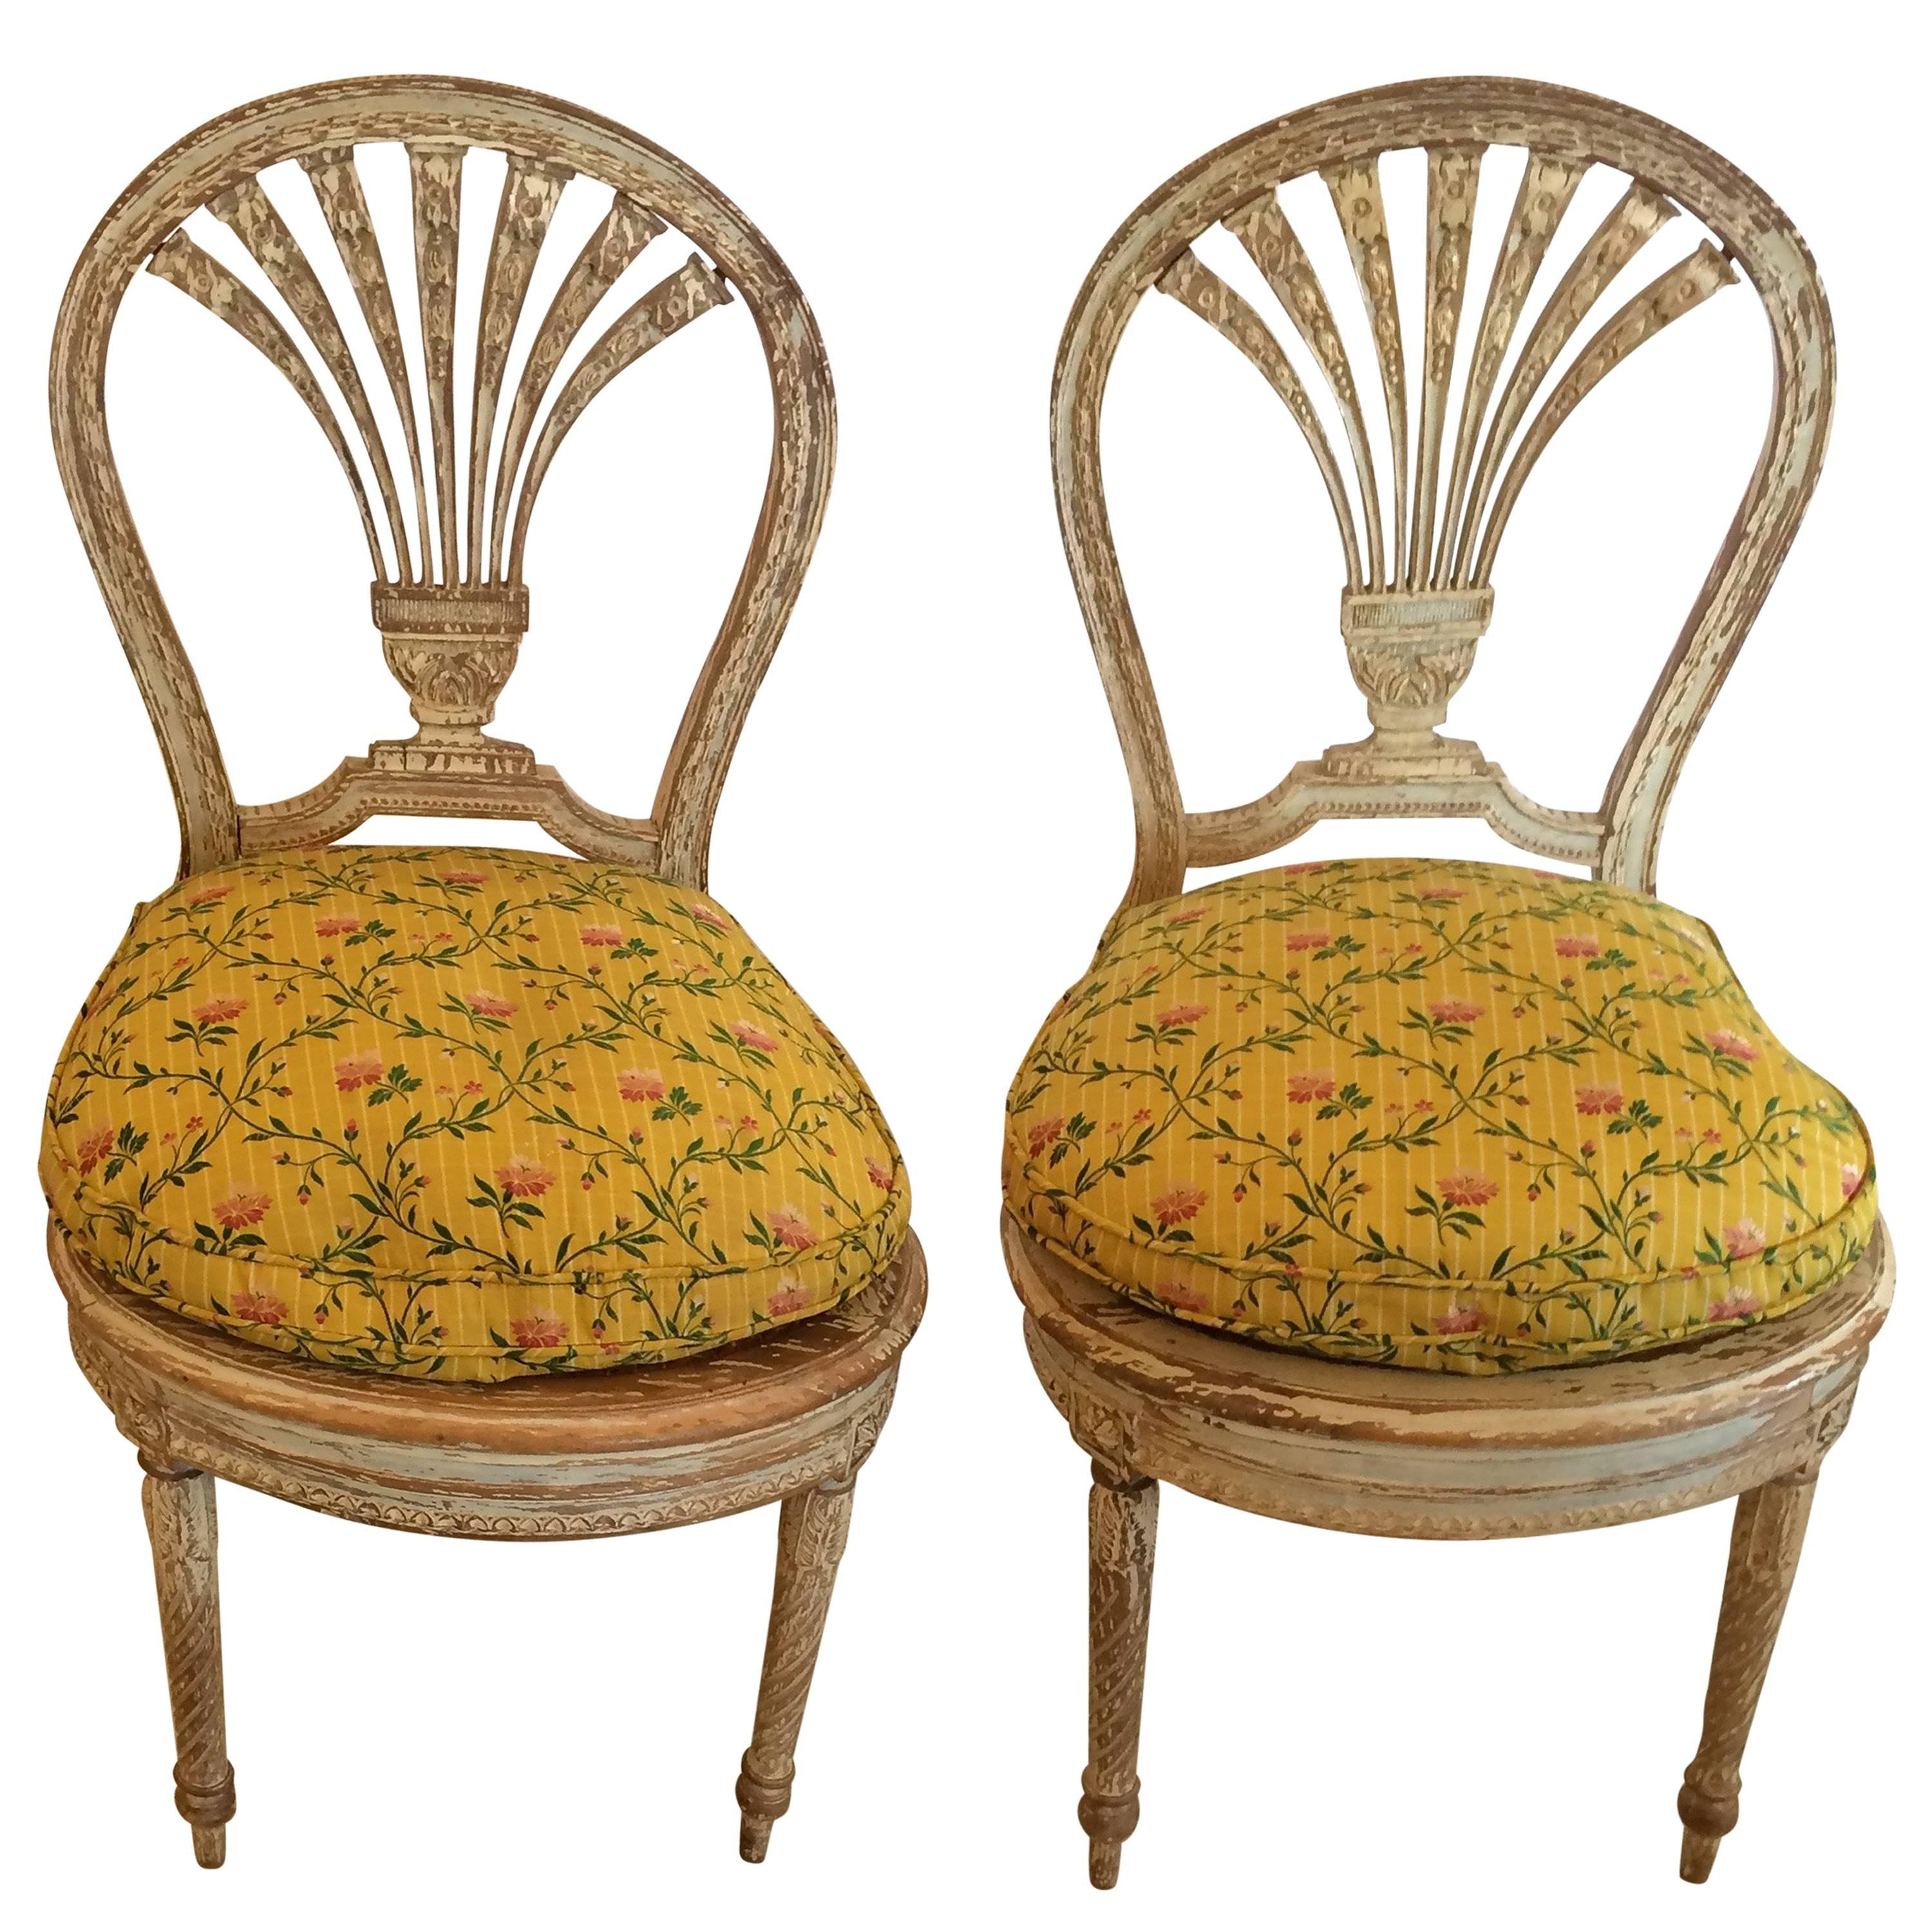 Pair of Charming Louis XVI Style Painted Side Chairs